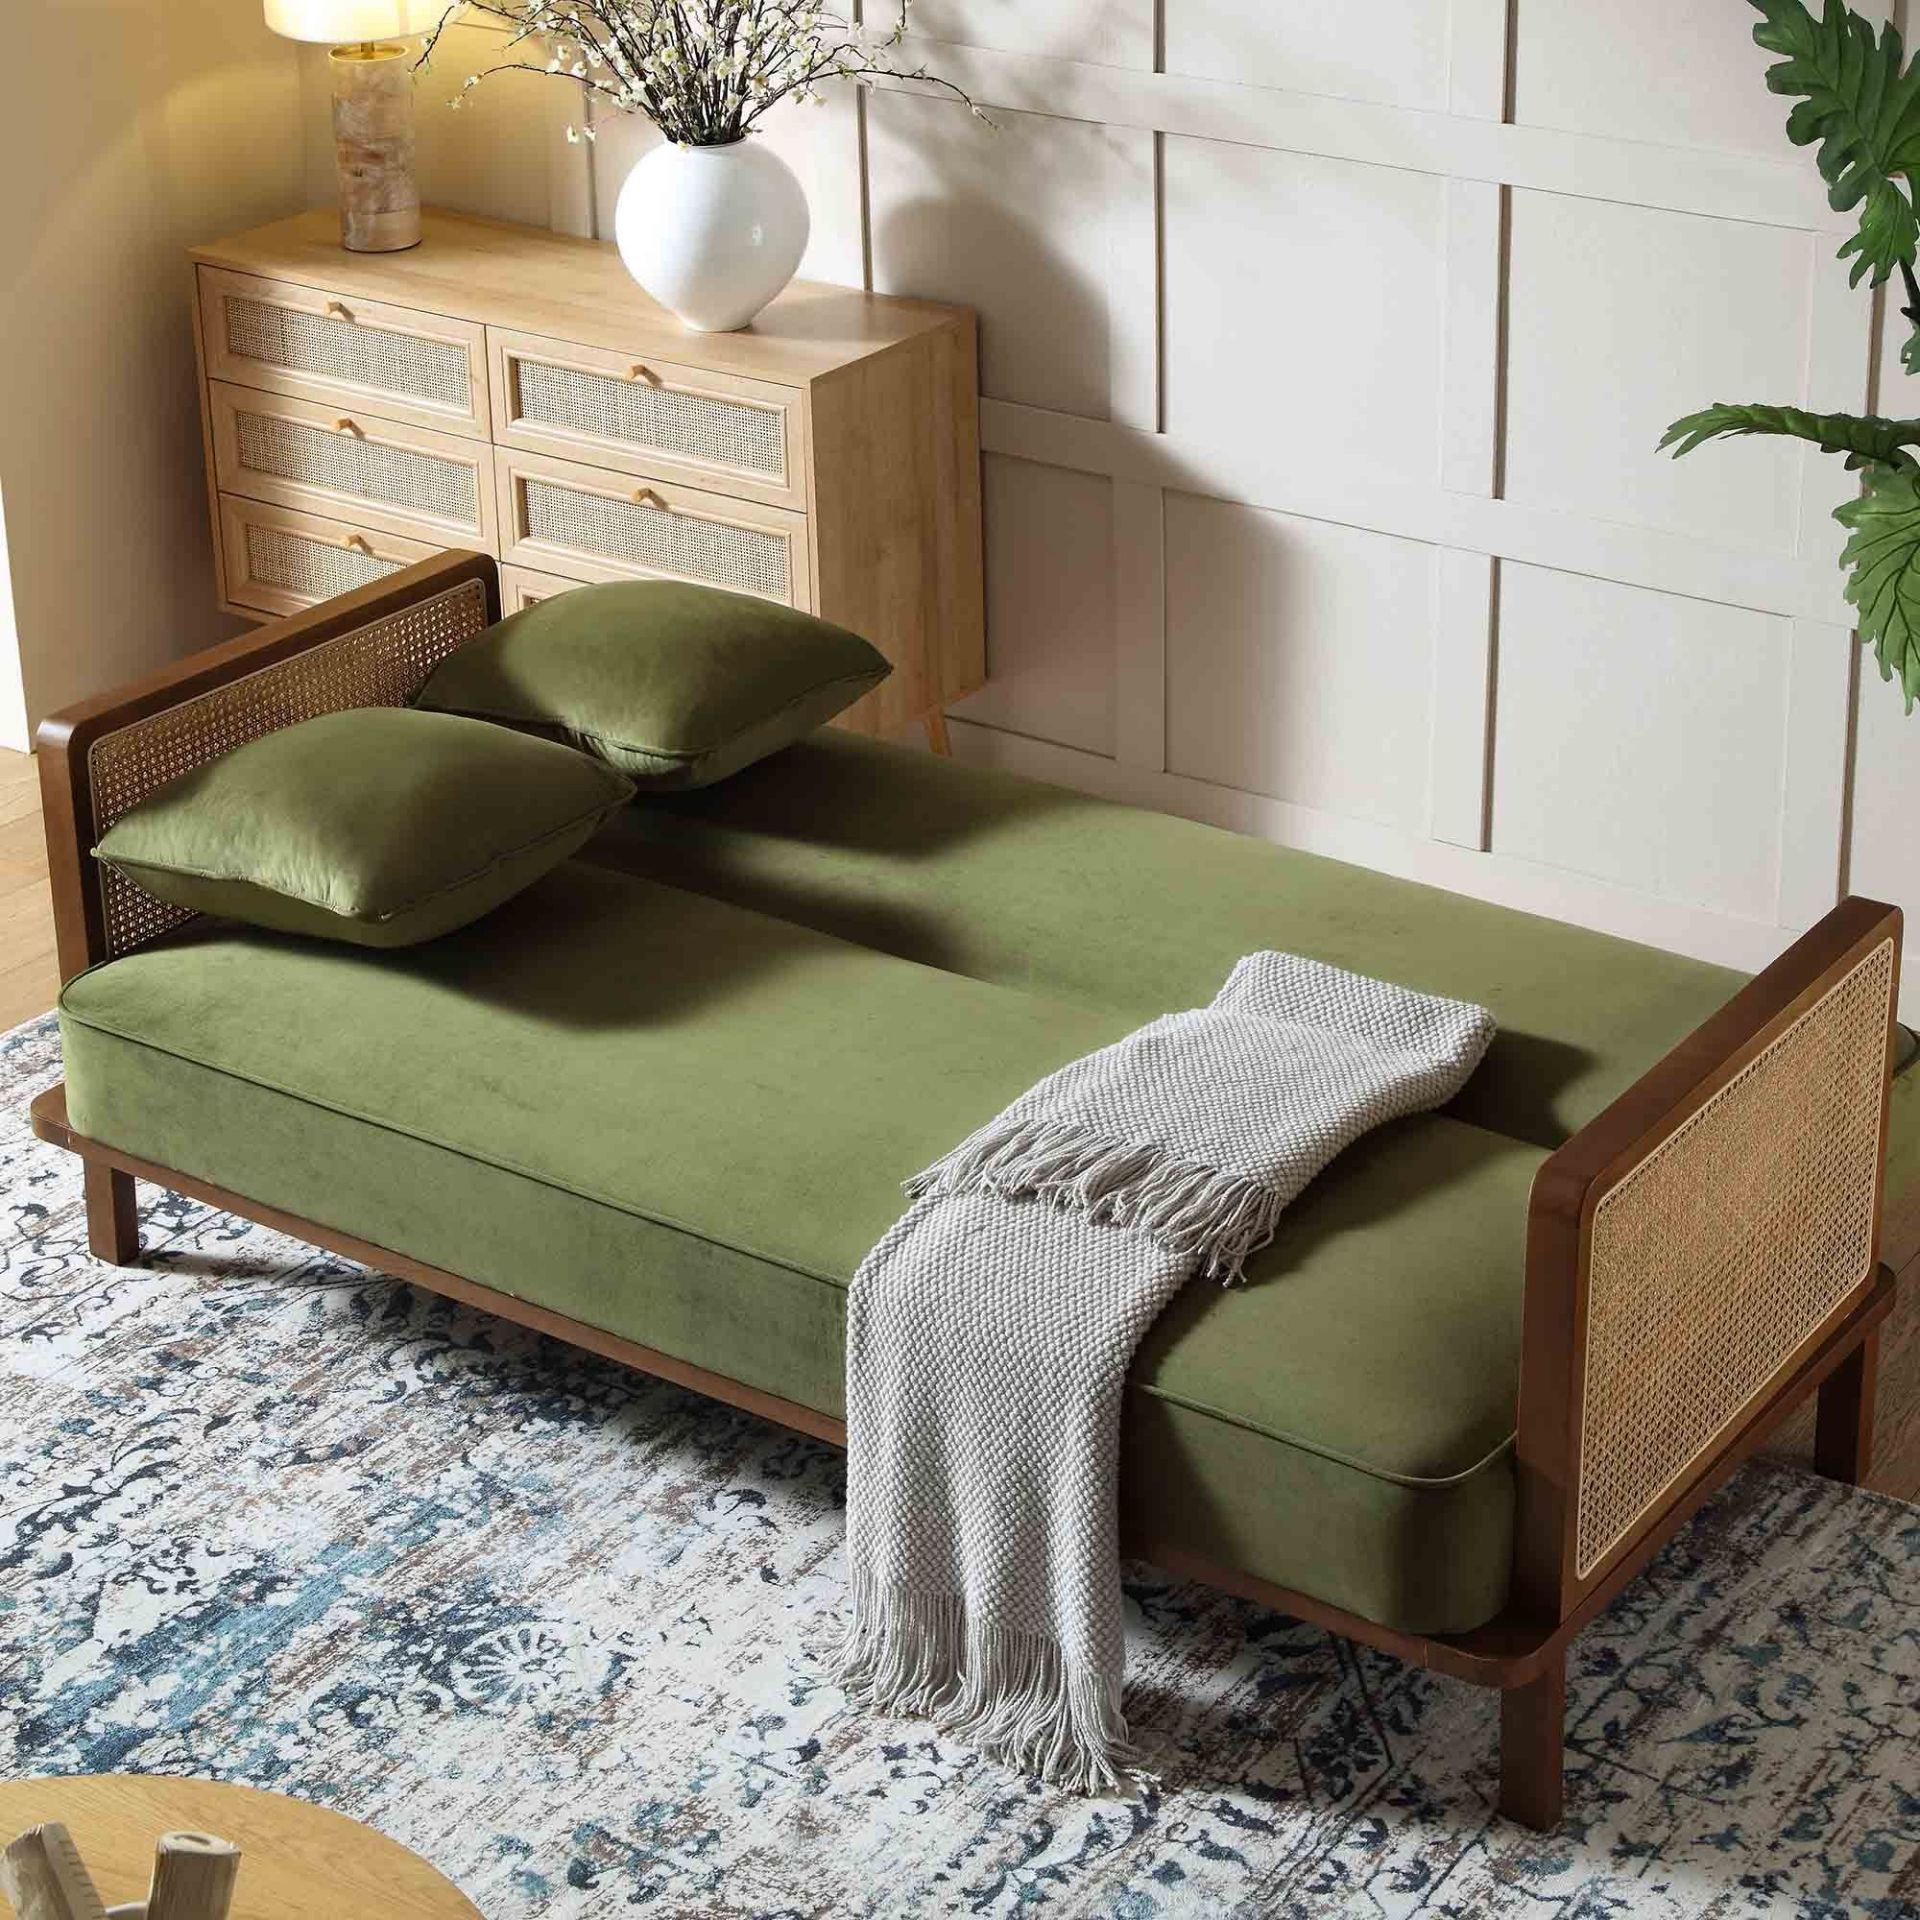 Pienza Cane Sofa Bed, Moss Green Velvet with Walnut Frame. - R14. RRP £649.99. Upholstered in - Bild 2 aus 2